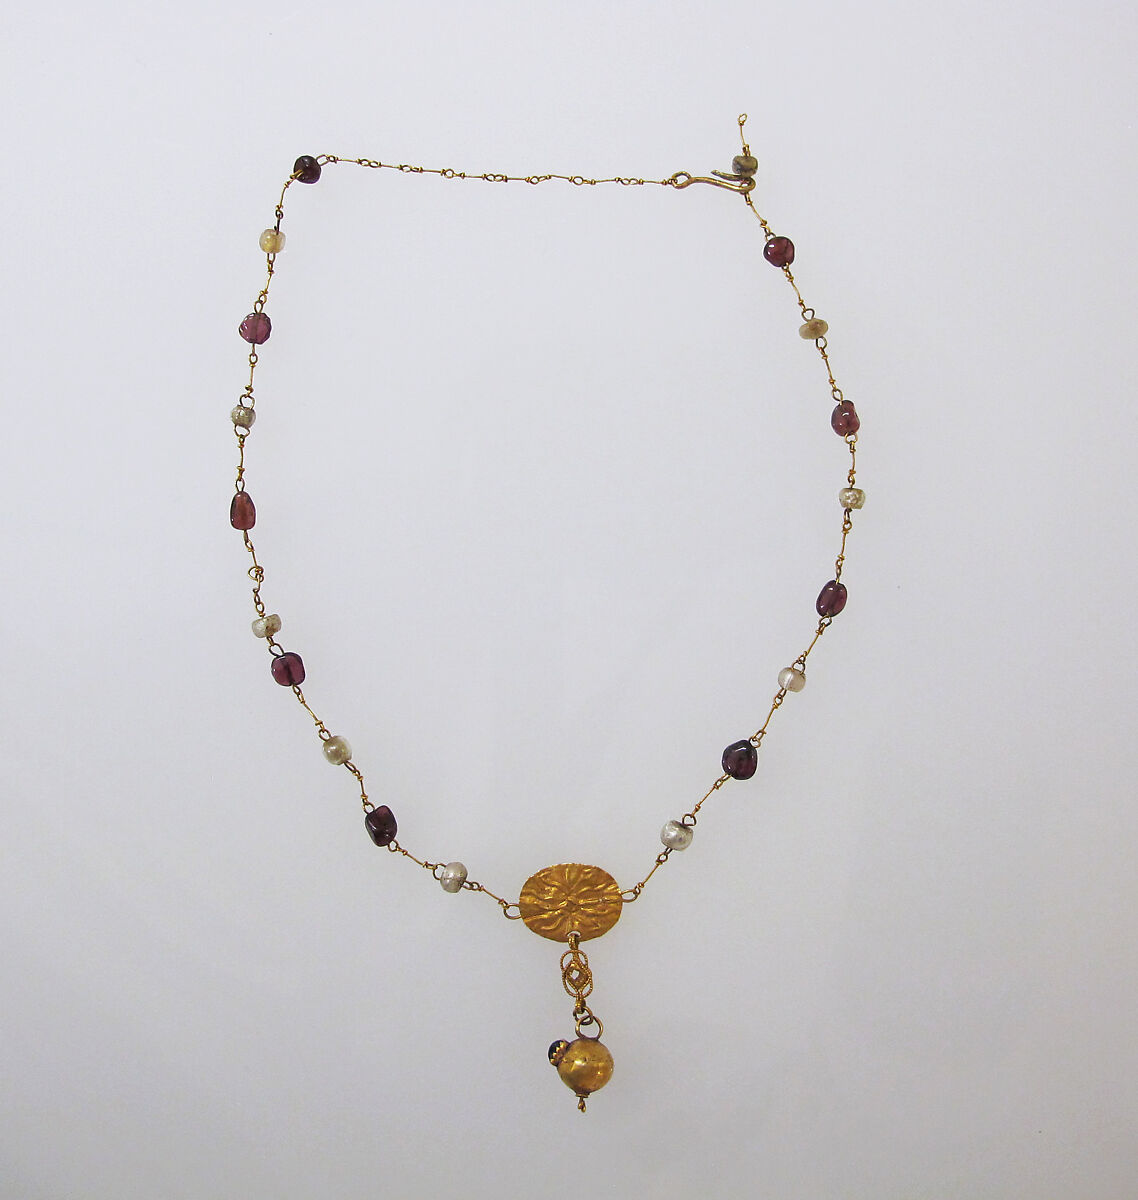 Necklace with pendant and glass beads, Gold, glass paste, Roman 